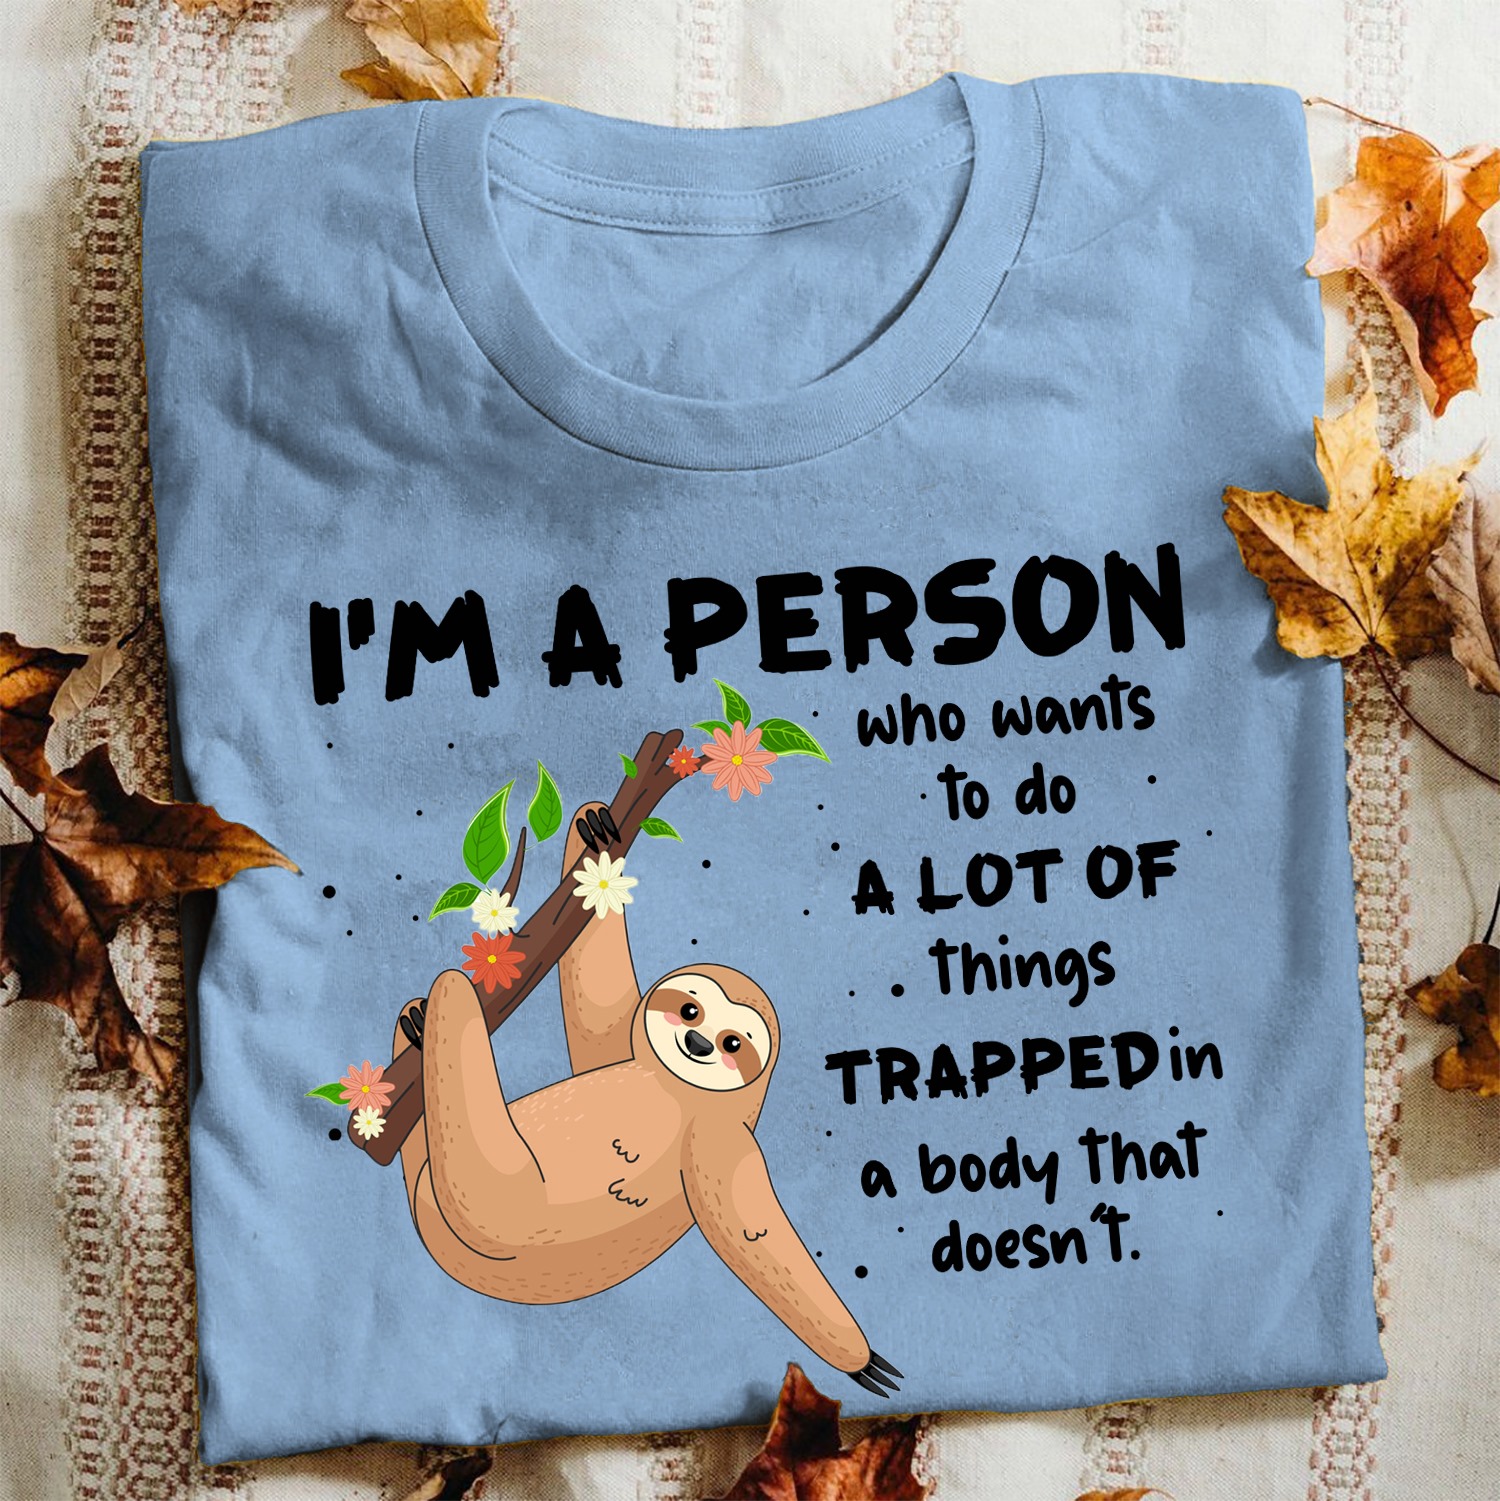 I'm a person who wants to do a lot of things trapped in a body that doesn't - Grumpy sloth